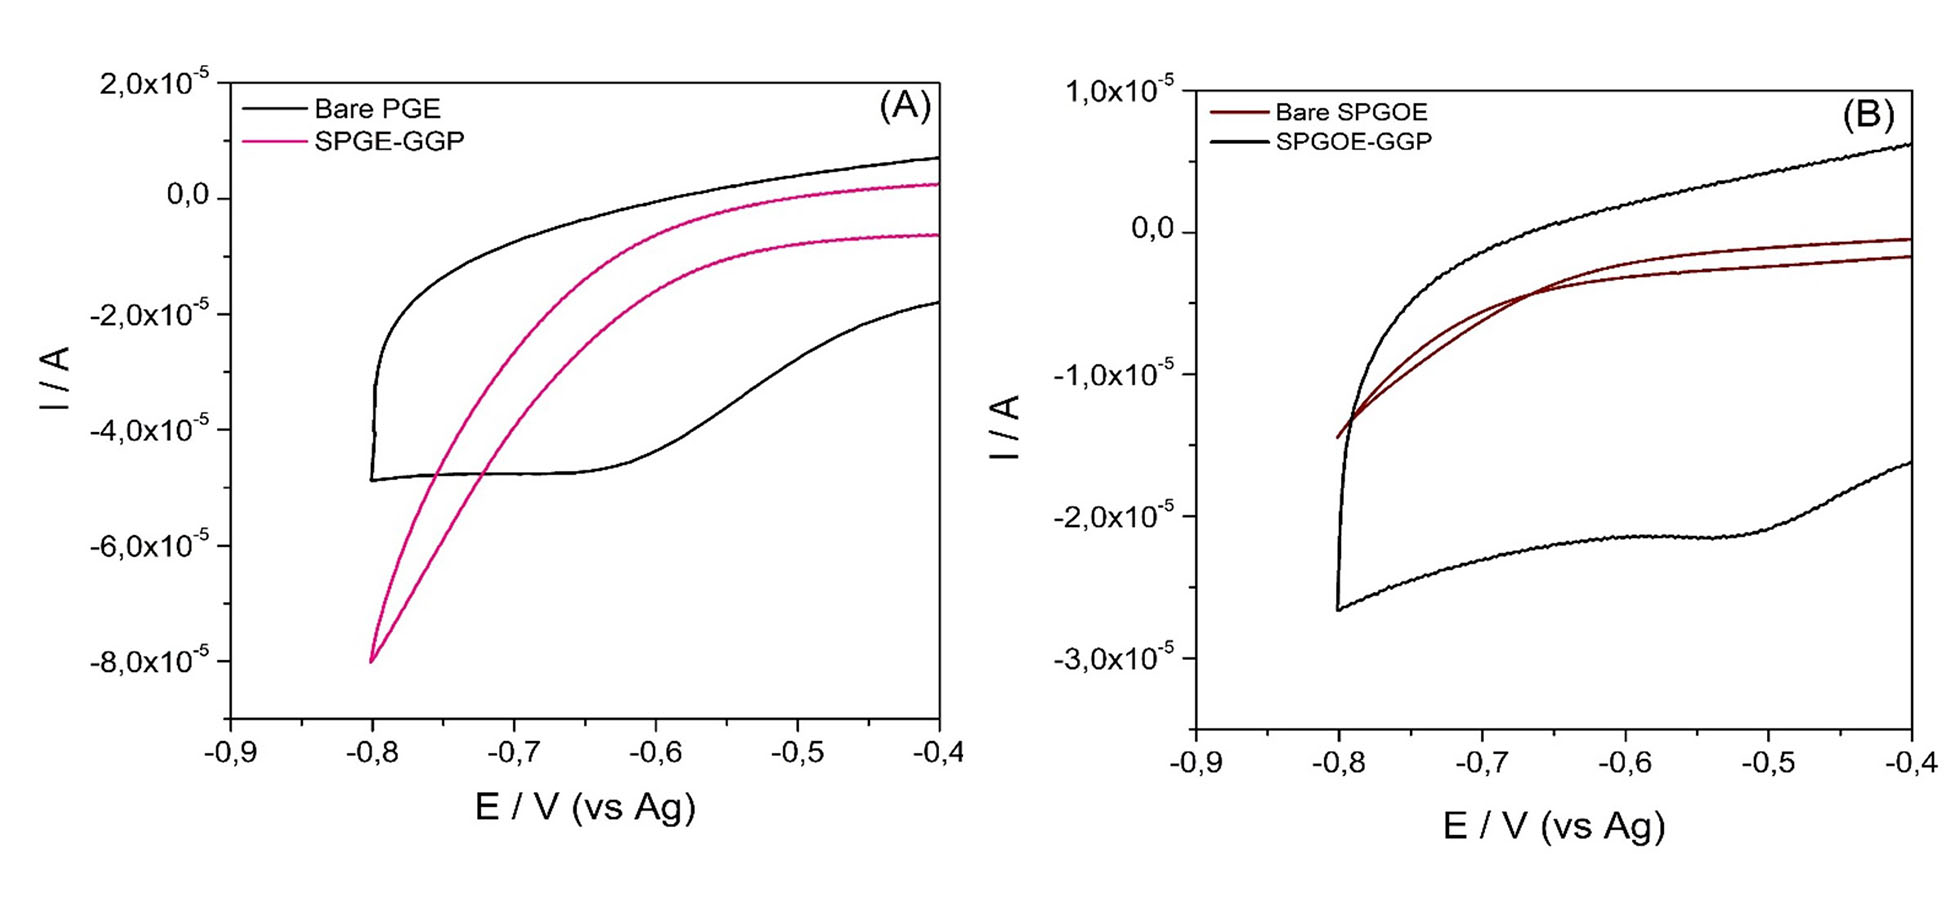 Cyclic voltammograms of (A) bare SPGE and SPGE-GGP in the absence (magenta line) and presence of H2O2 1 mM (black line); (B) bare SPGOE and SPGOE-GGP in the absence (red line) and presence of H2O2 1 mM (black line); scan rate 50 mV/s.